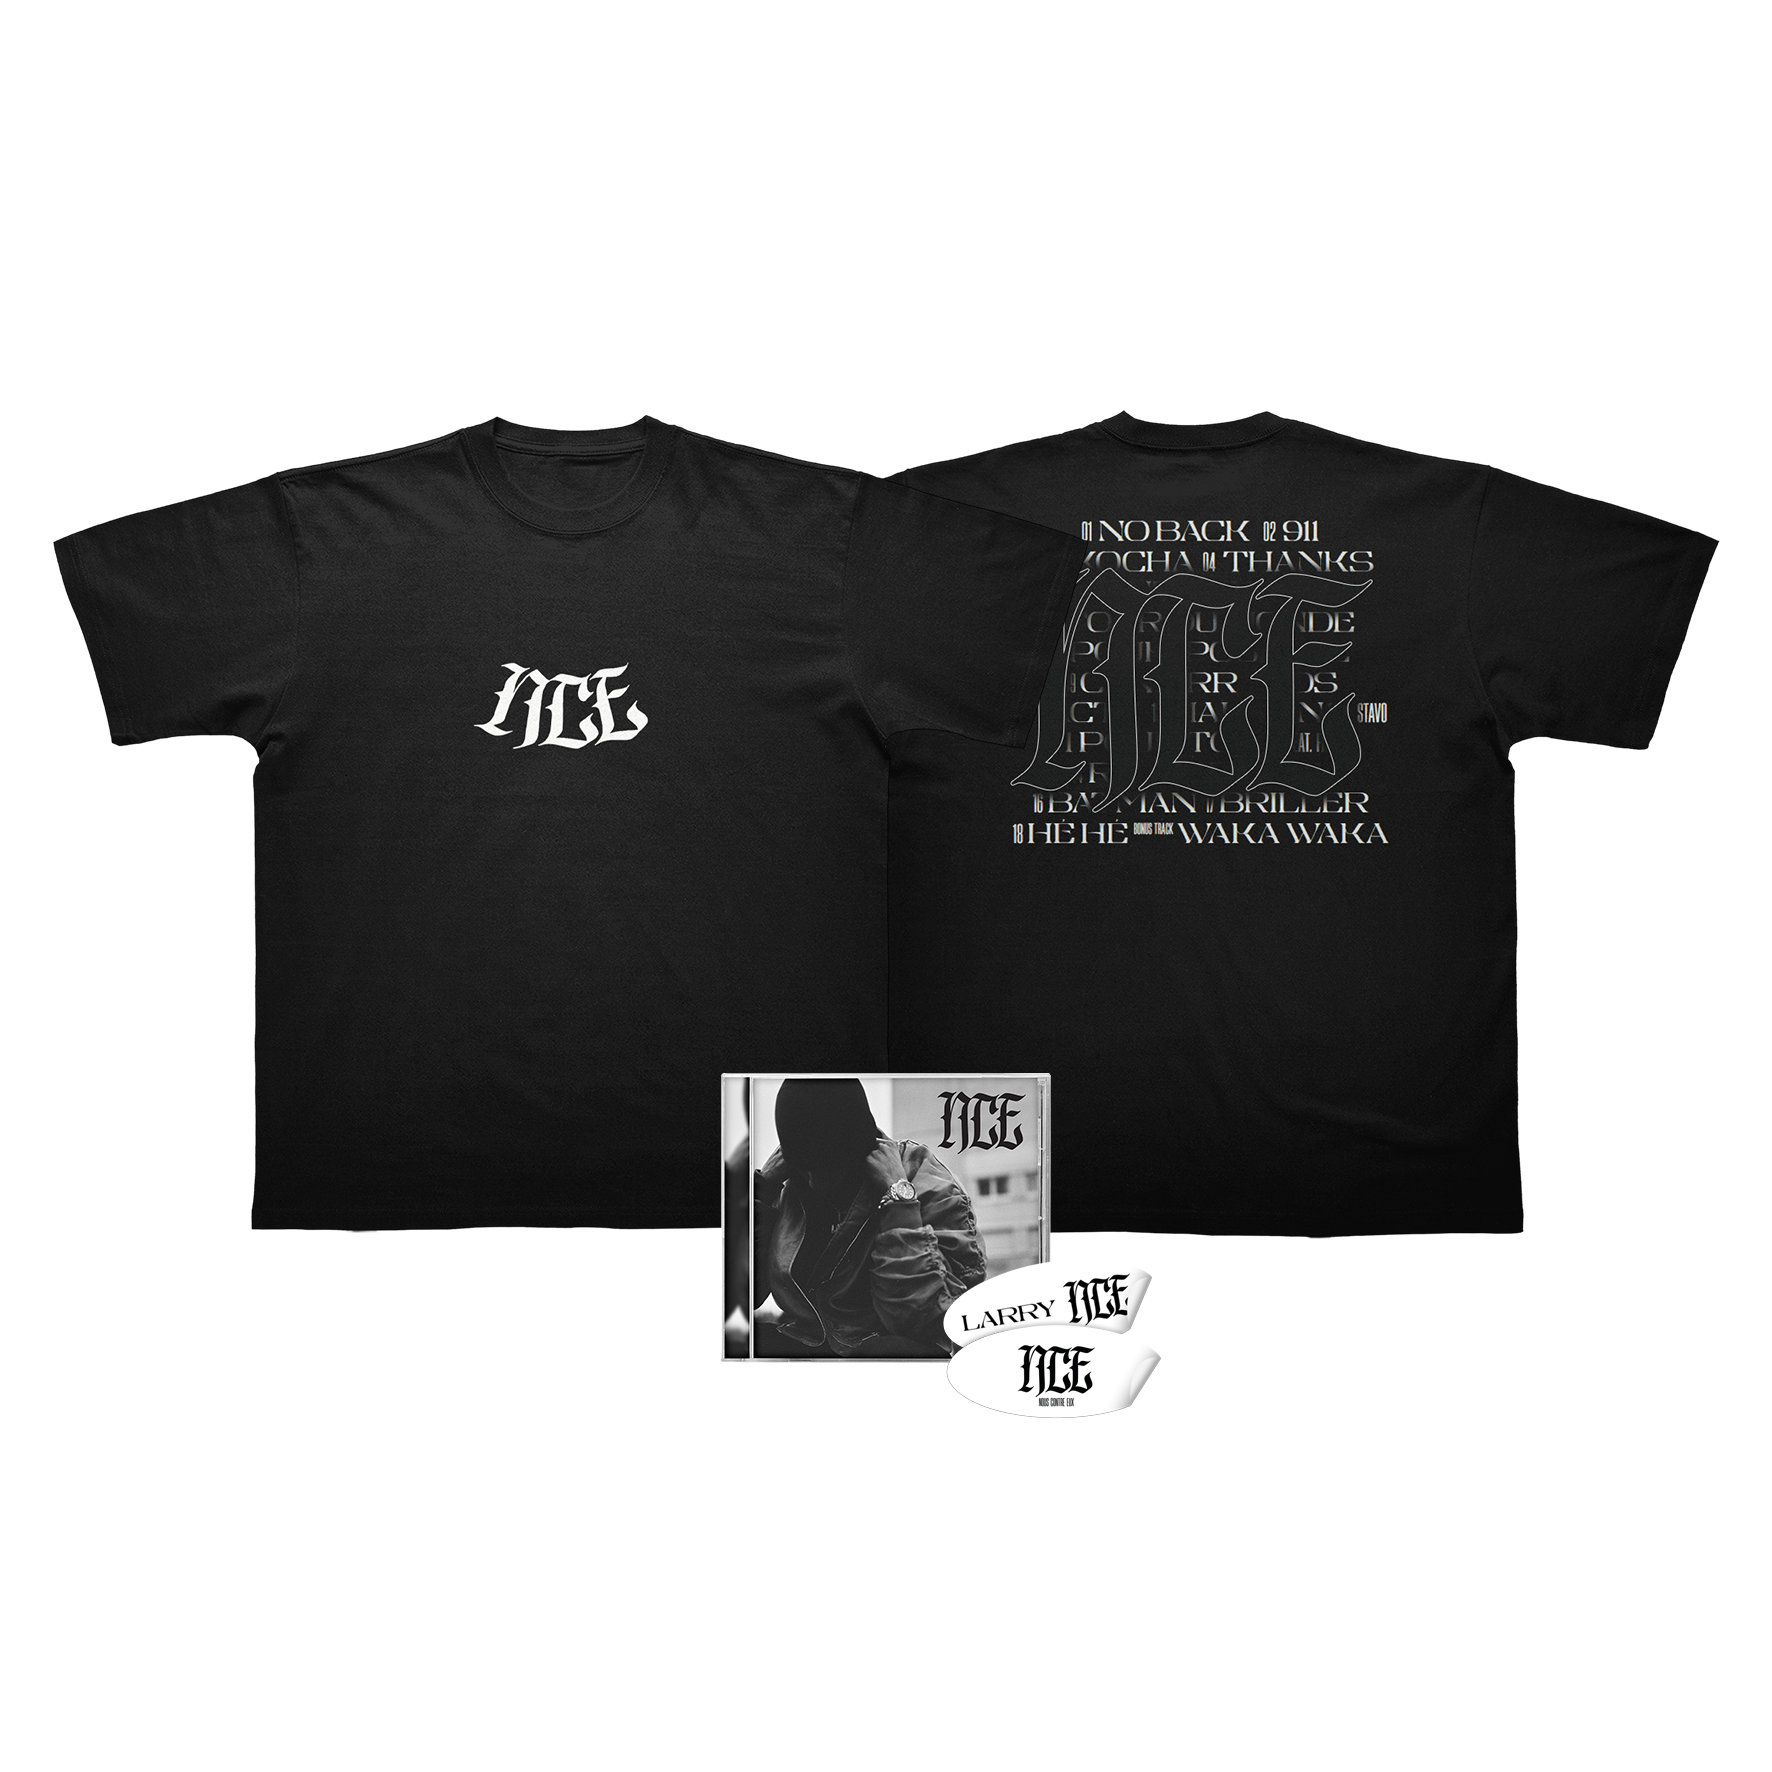 PACK CD "NCE" ÉDITION NOIRE + T-SHIRT + STICKERS